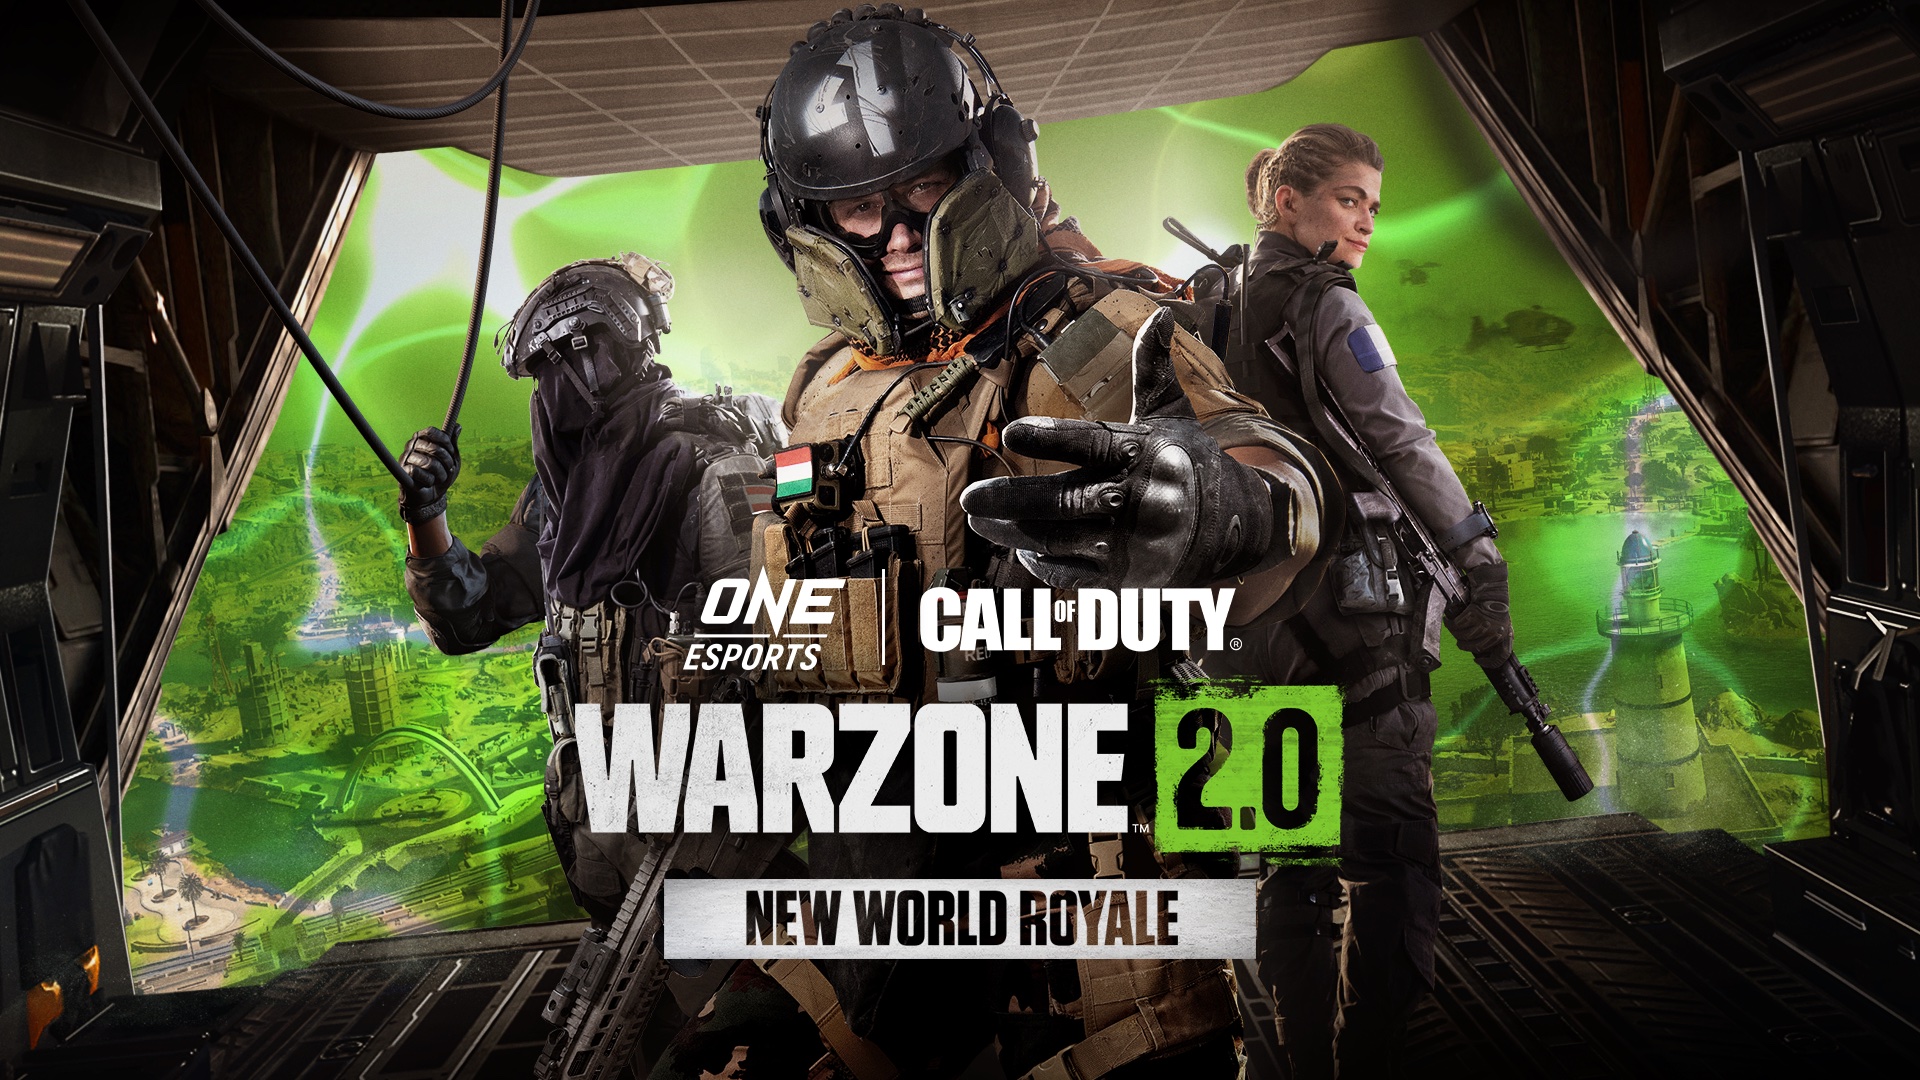 Call of Duty® Warzone™ 2.0 ONE Esports New World Royale will stream on 17 